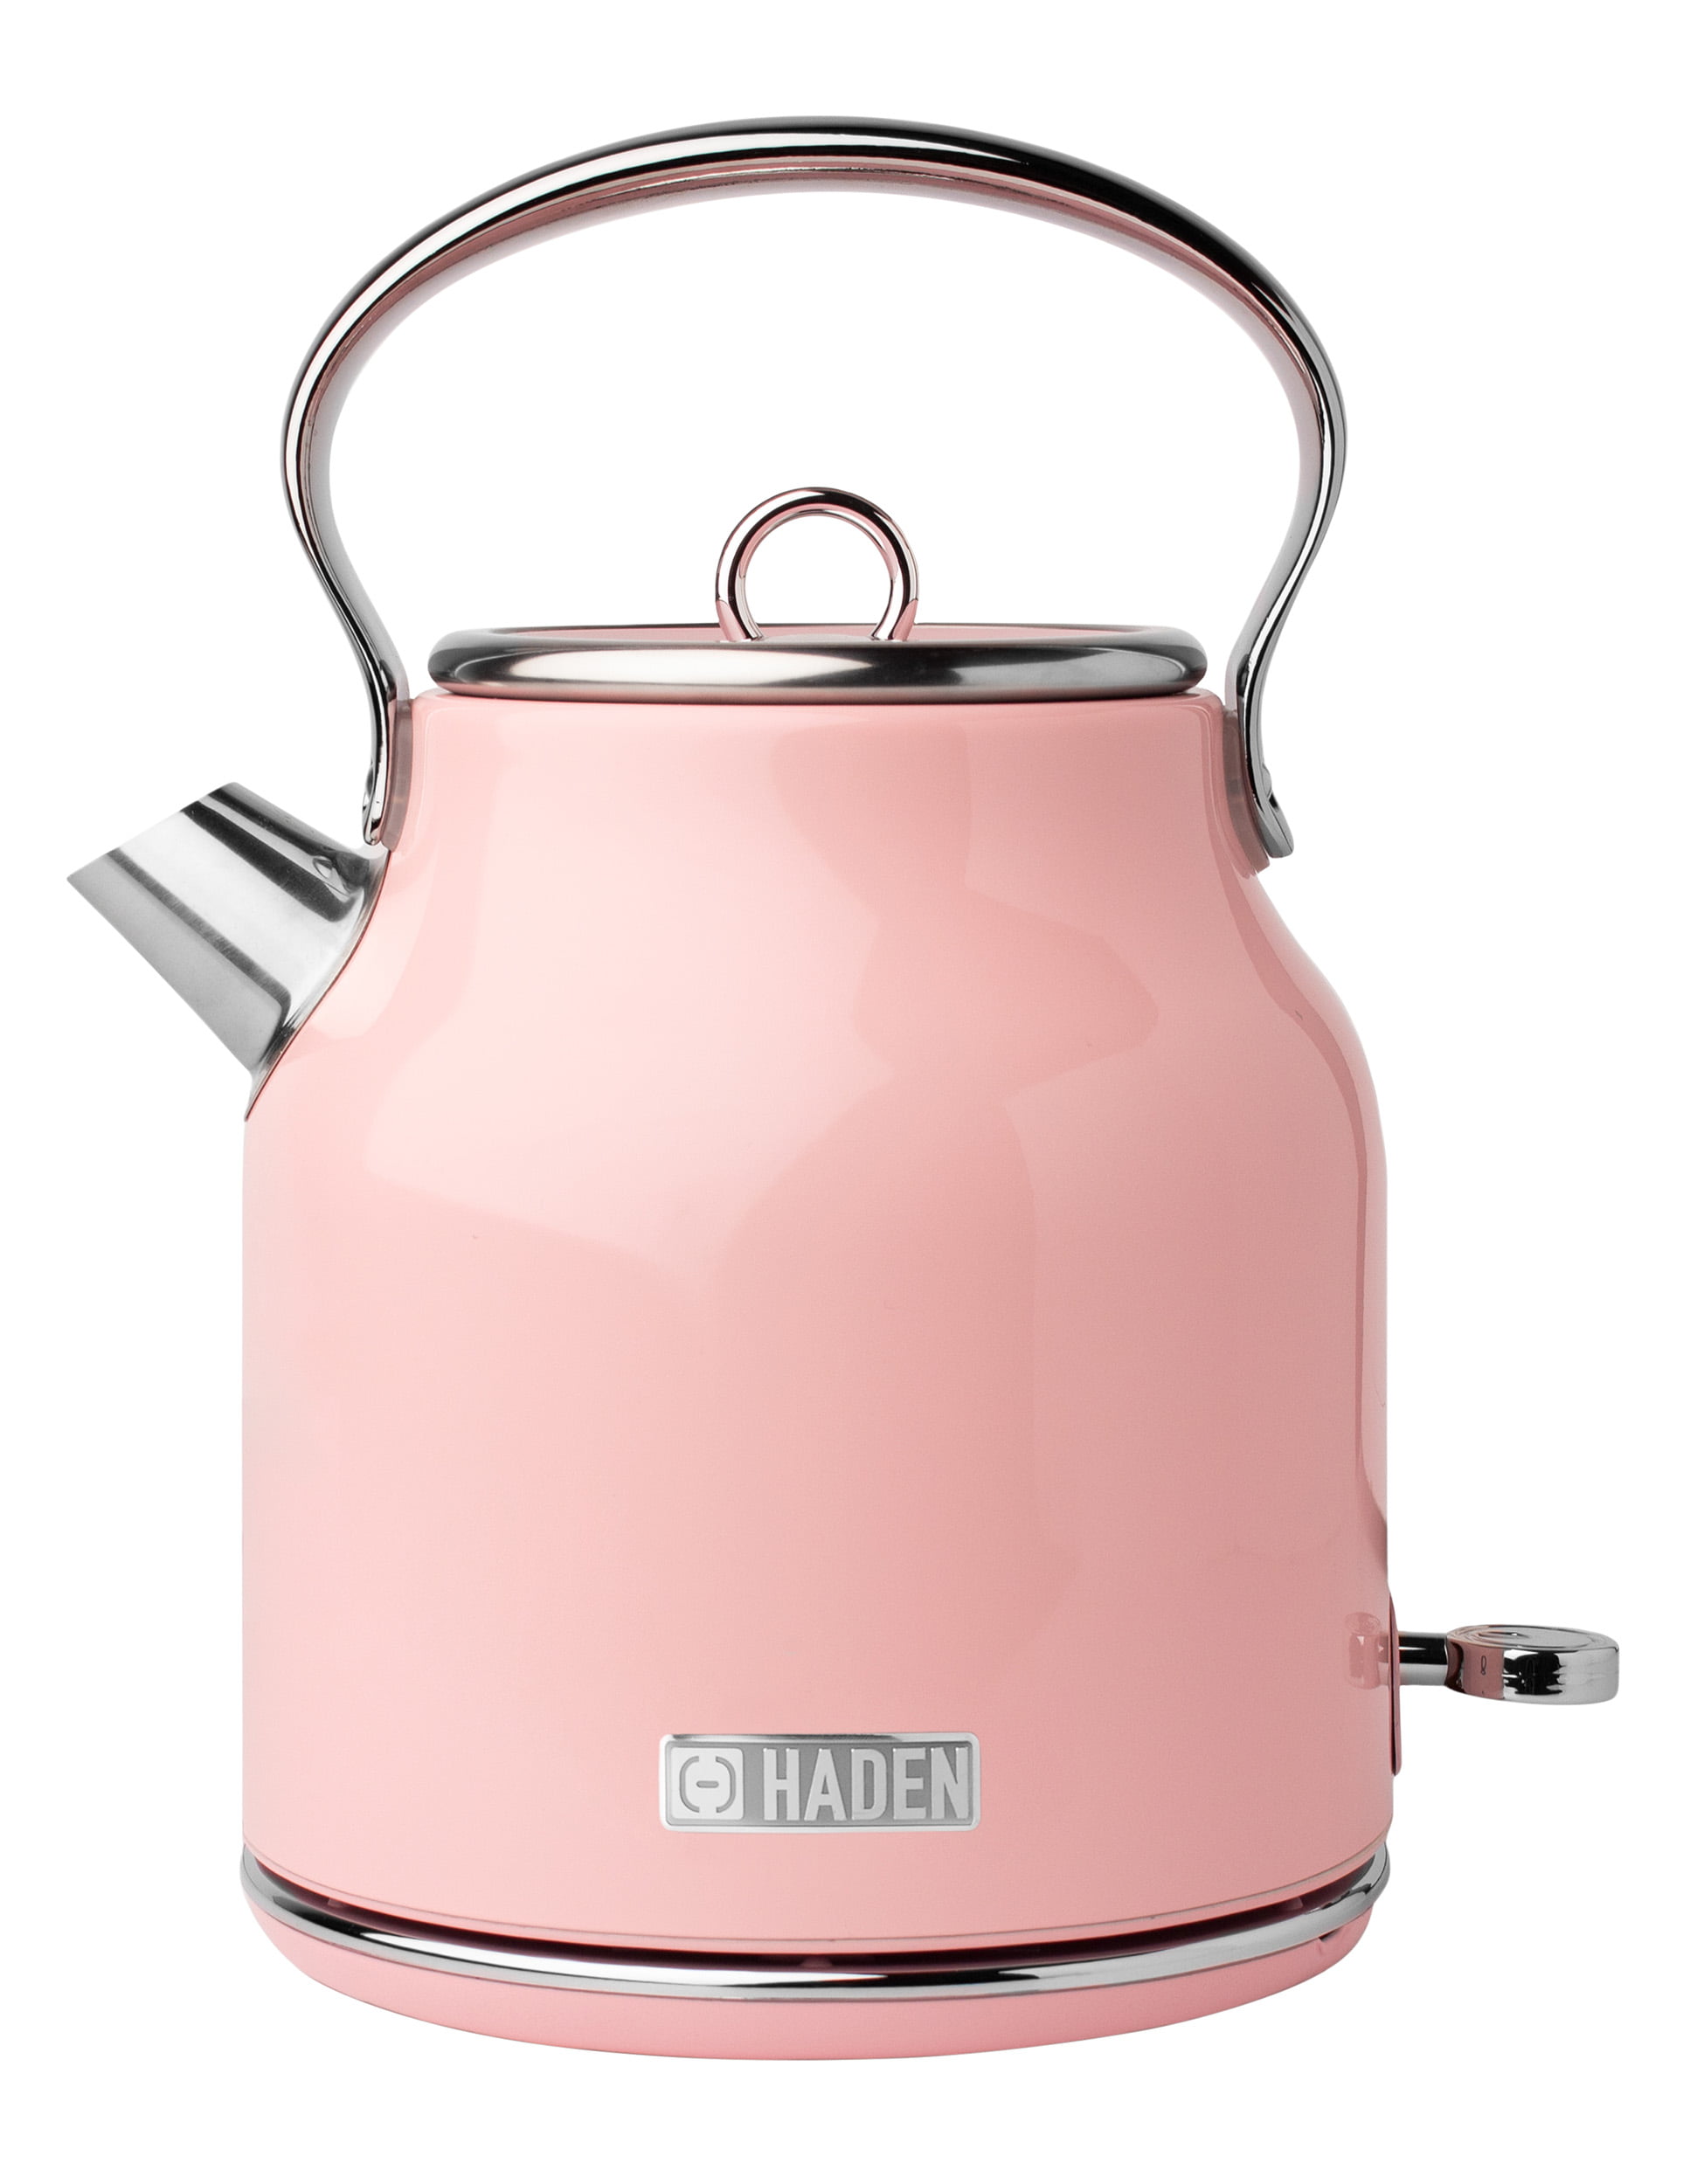 Haden Heritage 1.7 Liter (7 Cup) Stainless Steel Electric Kettle, English Rose